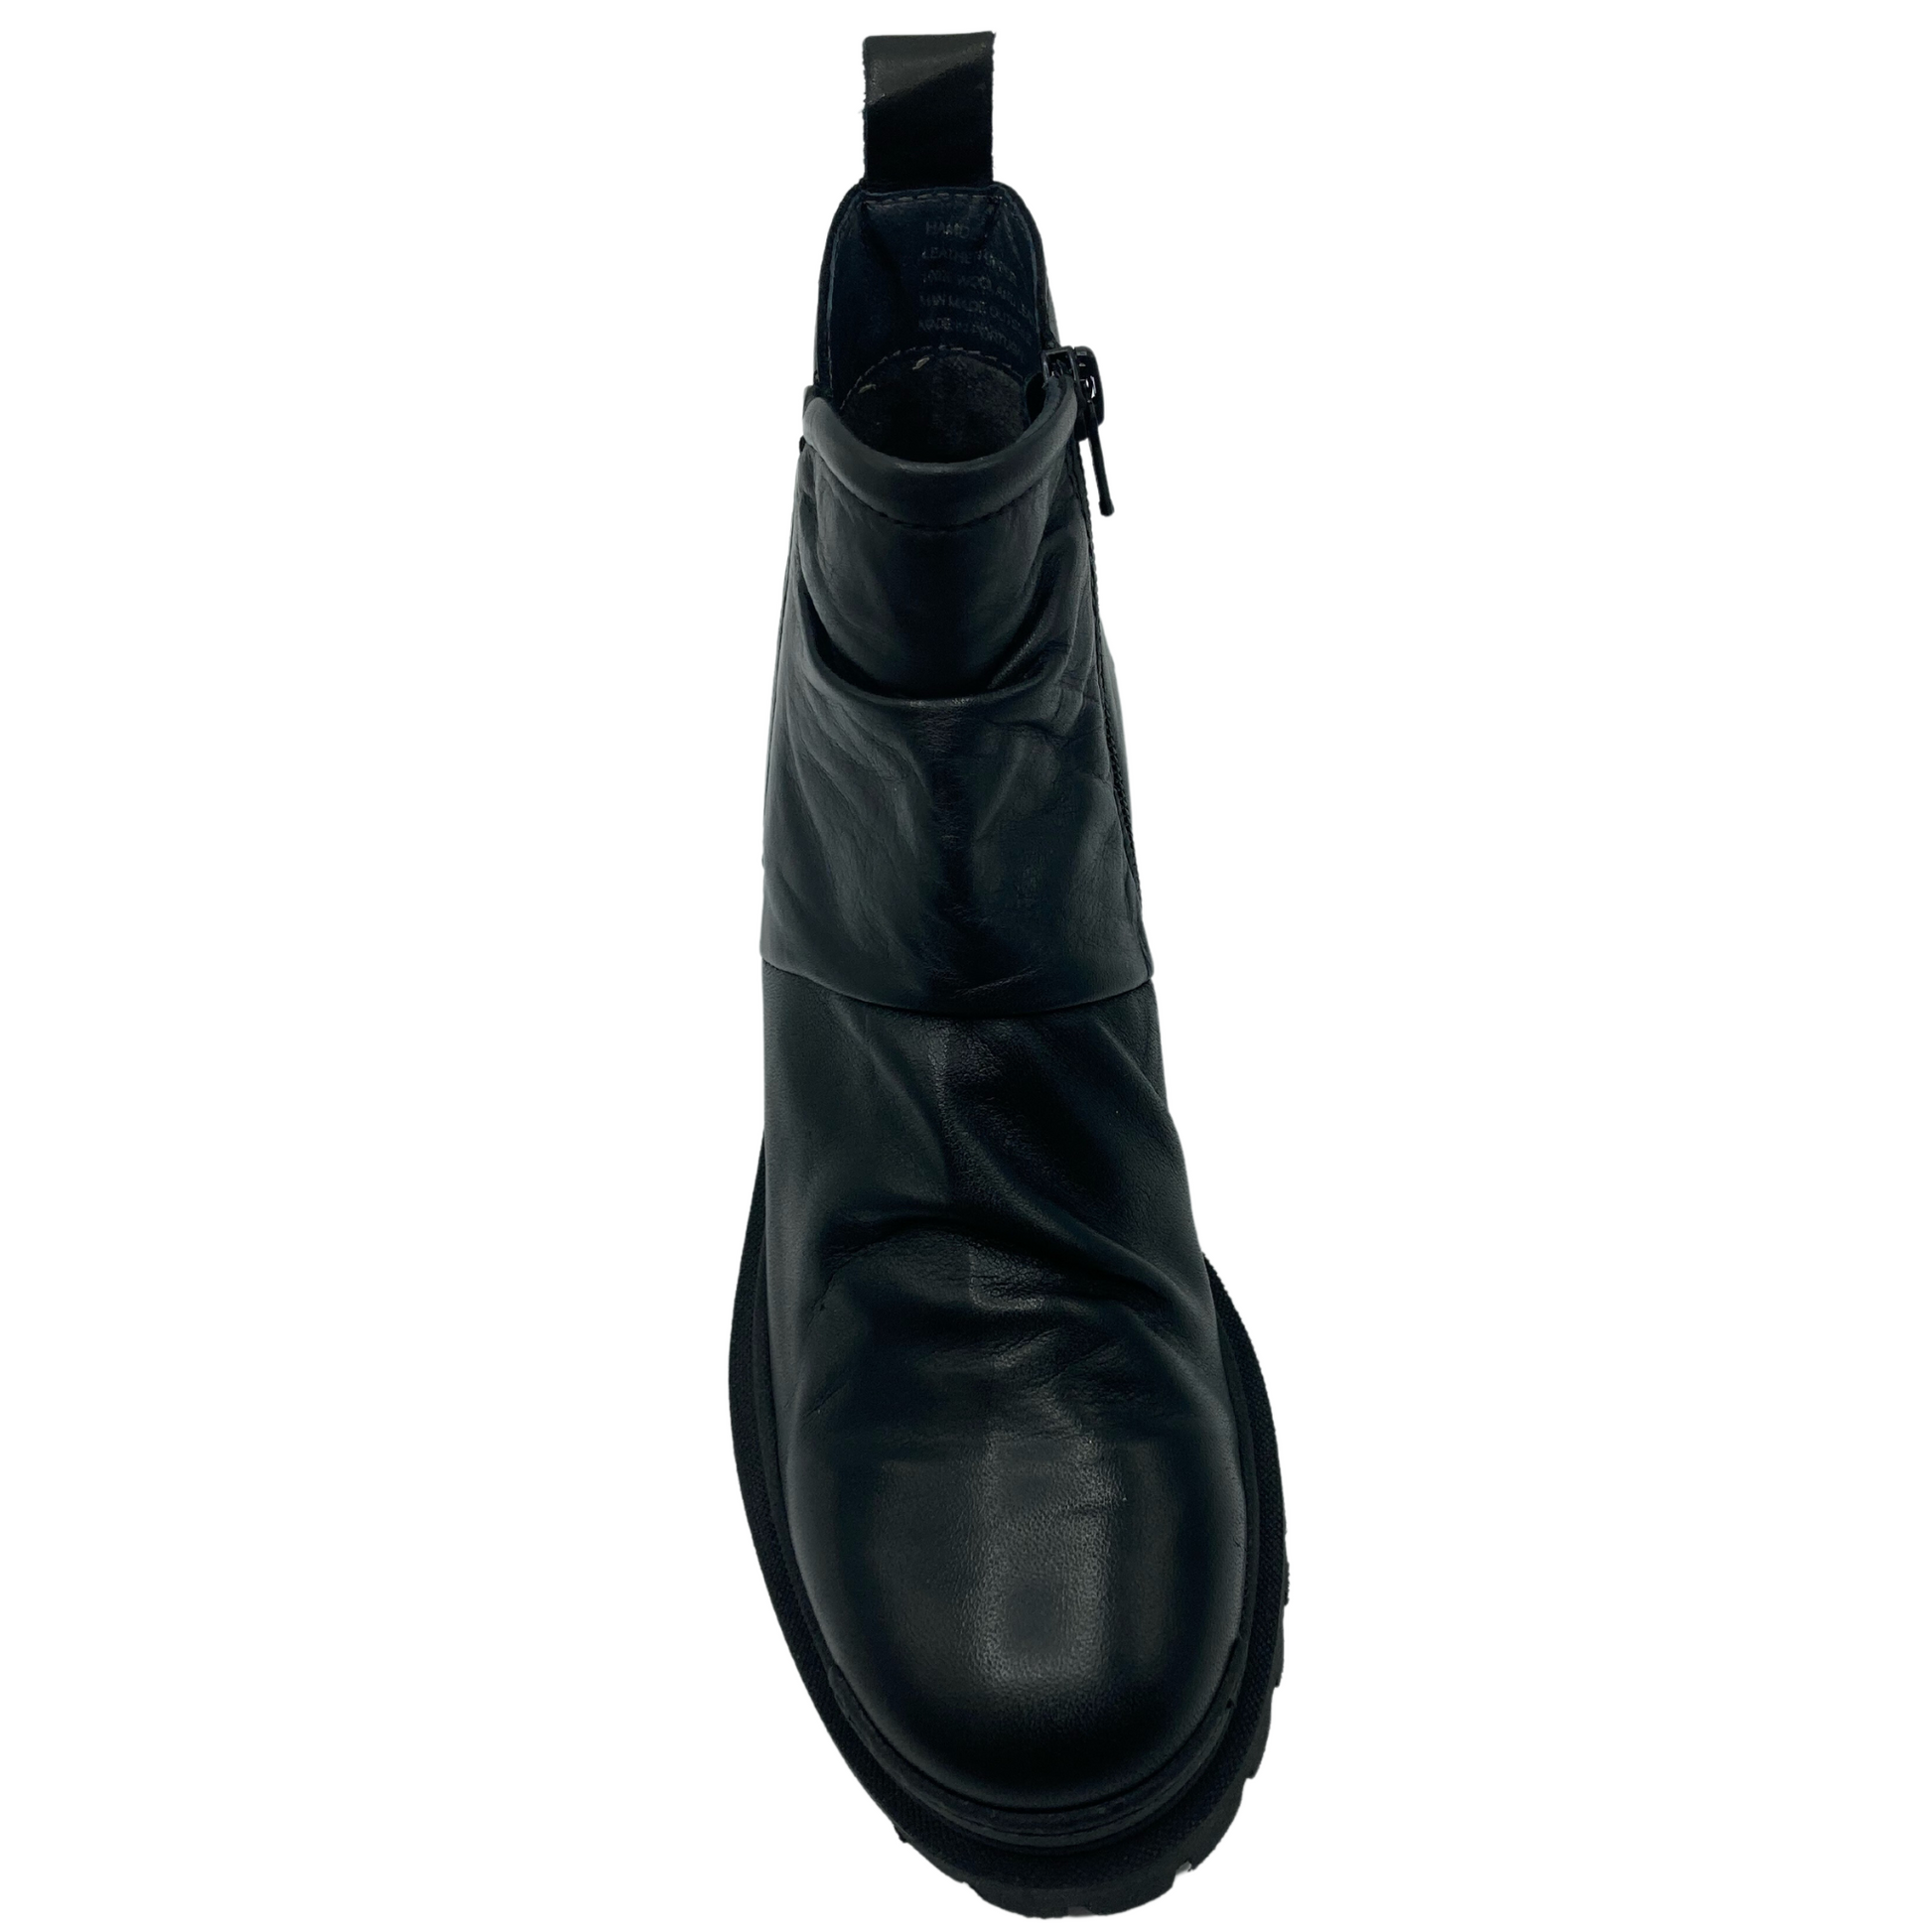 Top view of black leather boot with rounded toe and chunky rubber sole